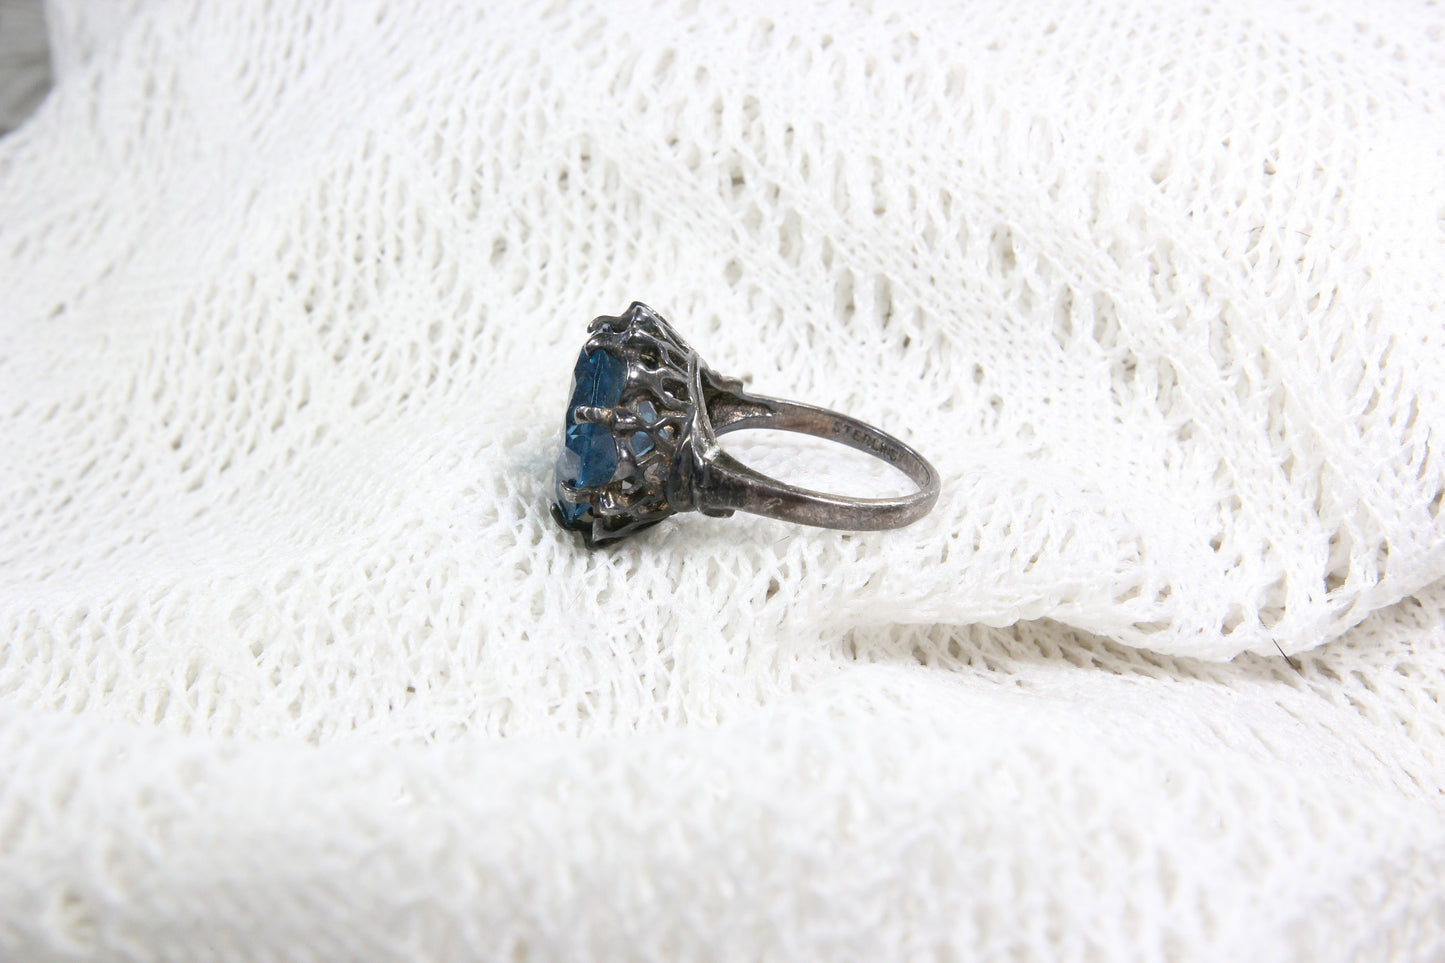 Ornate Sterling Silver Ring with Large Translucent Blue Stone, Size 7